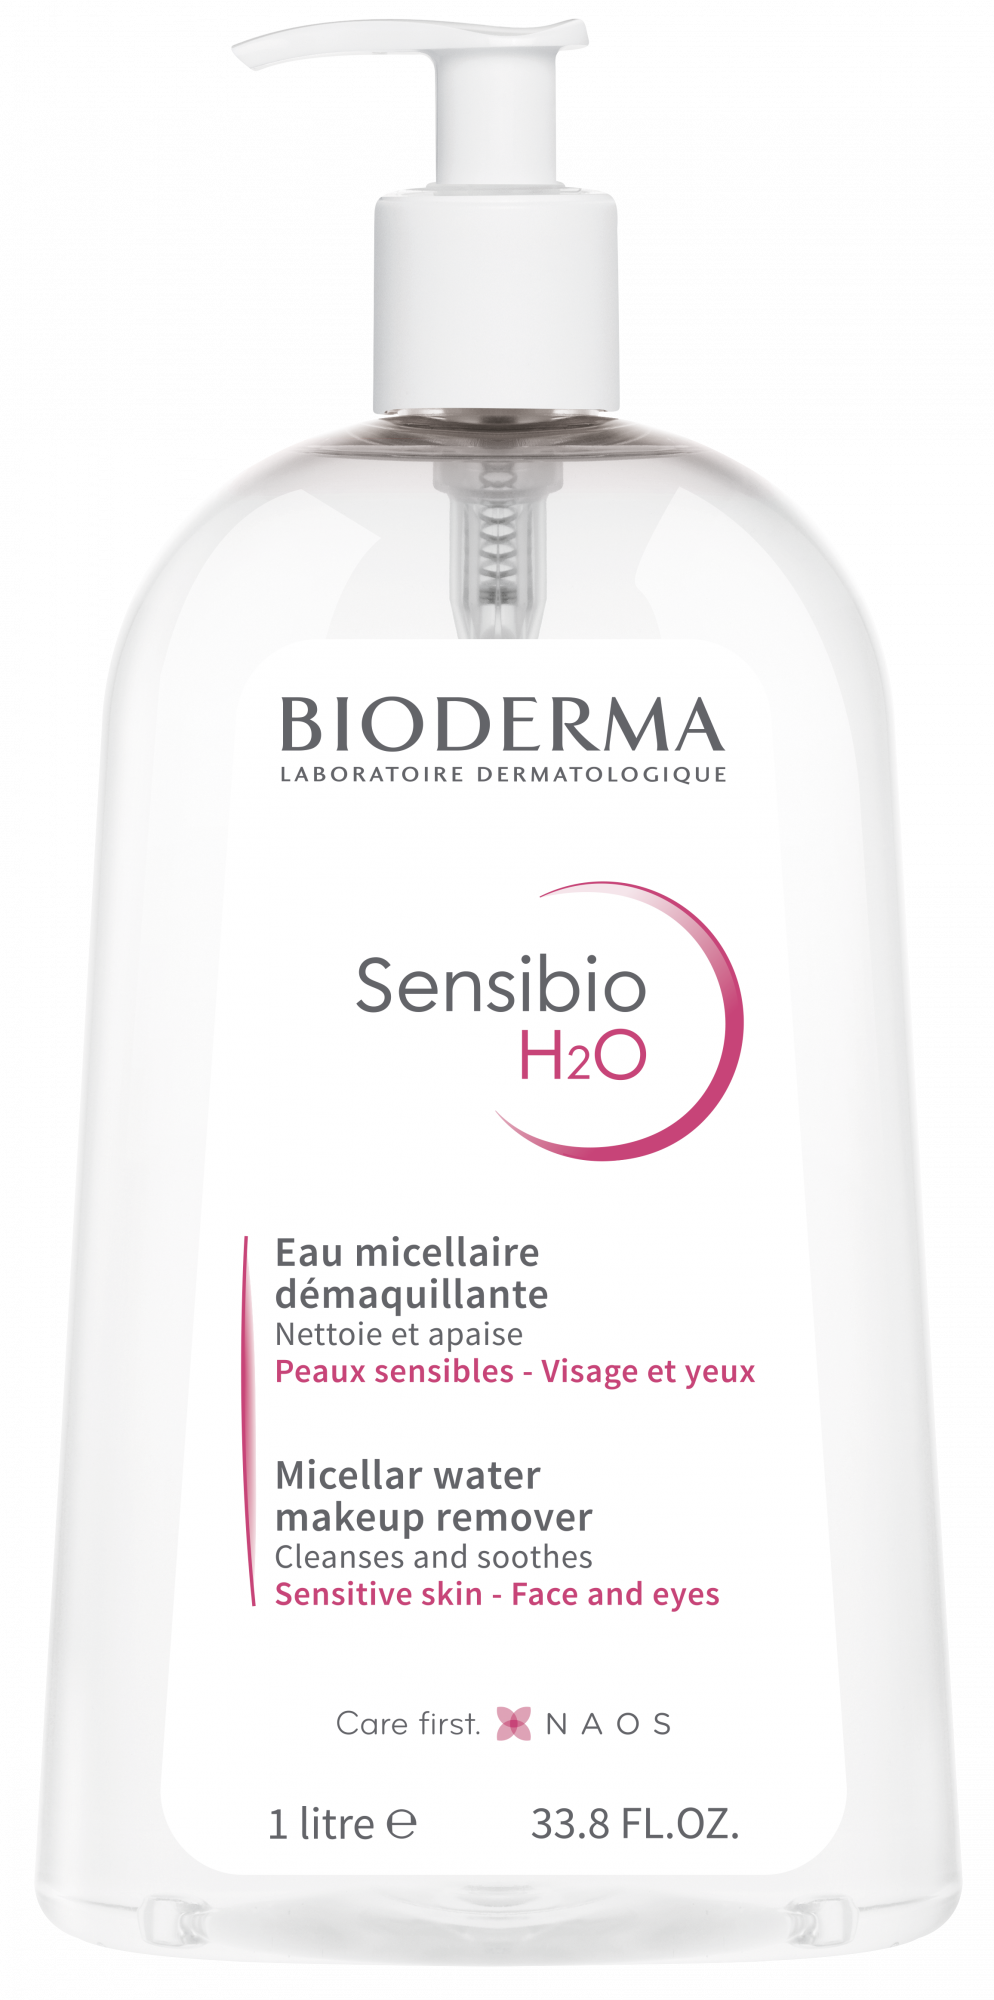 Bioderma - Sensibio, H2O Soothing Micellar Cleansing Water and Makeup  Removing Solution for Sensitive Skin - Face and Eyes - 16.7 fl.oz. 